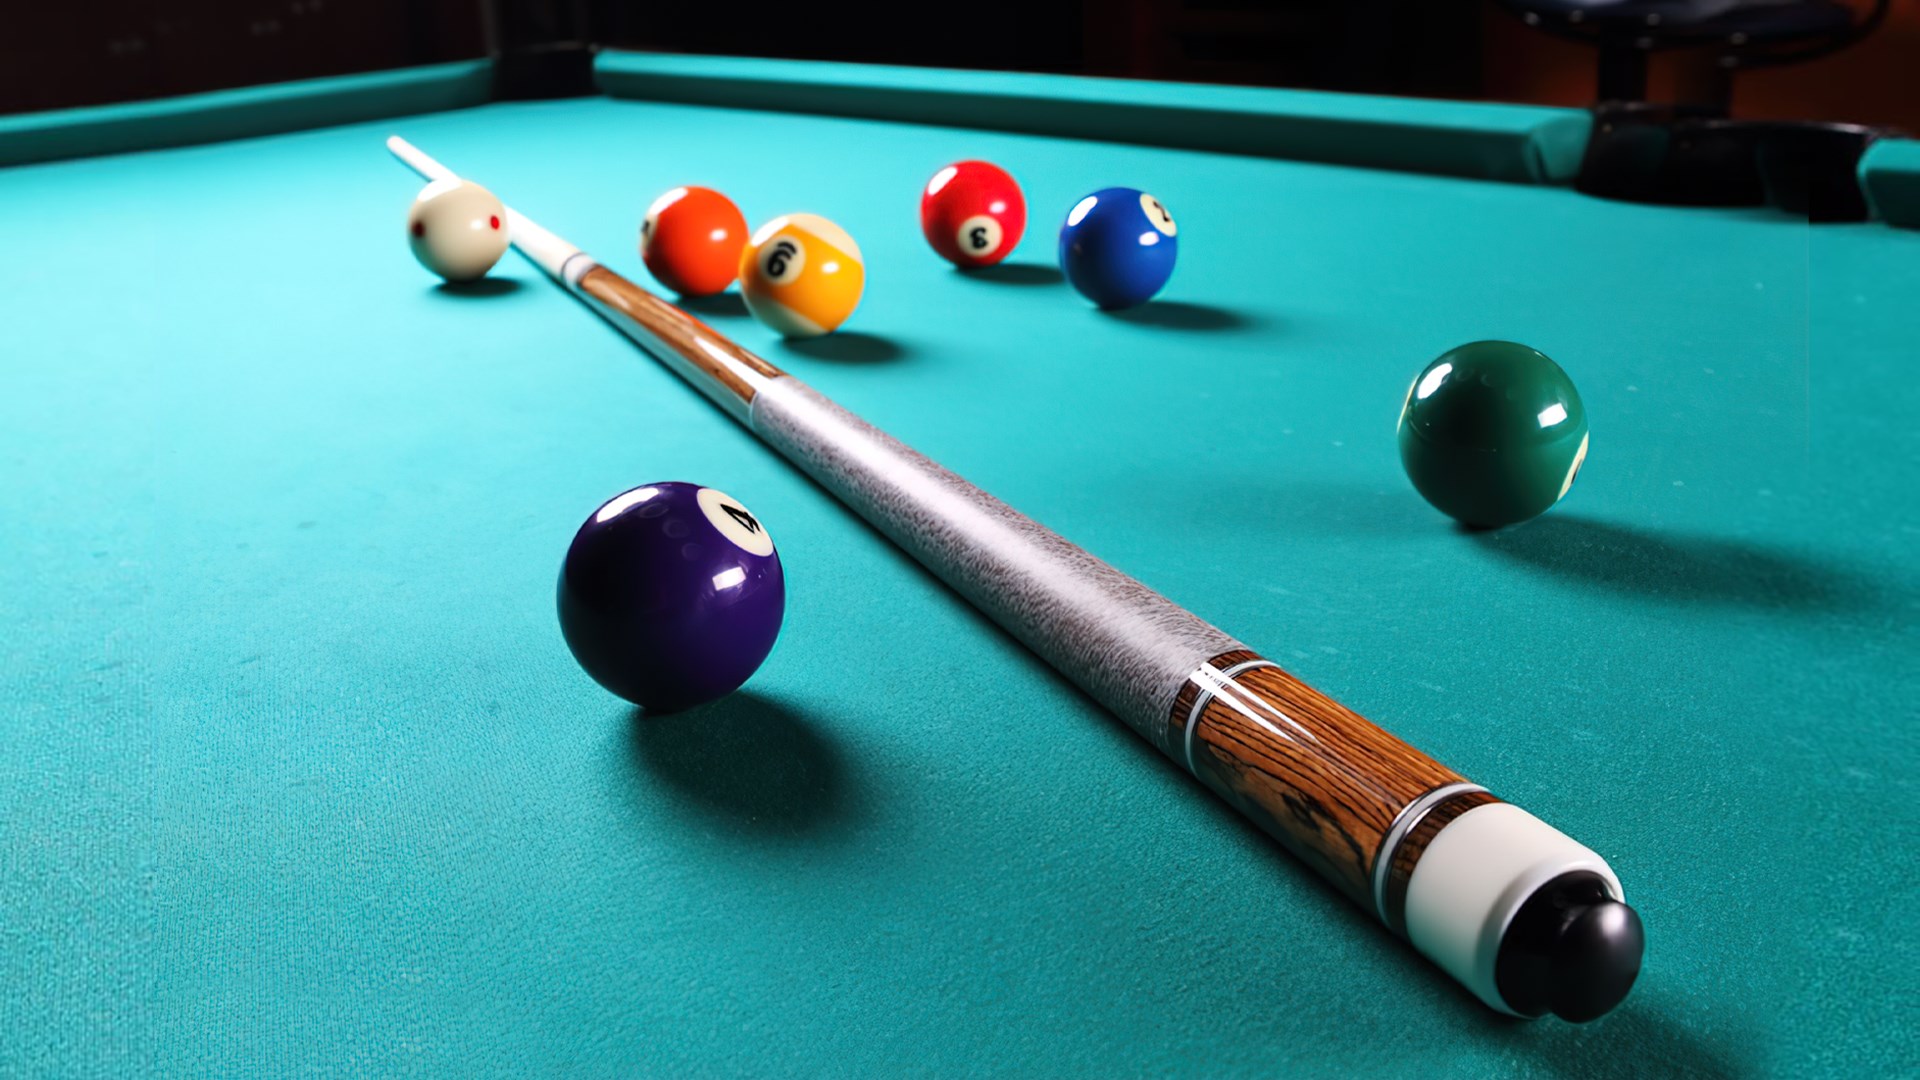 Play Pool Tour - Pocket Billiards Online for Free on PC & Mobile